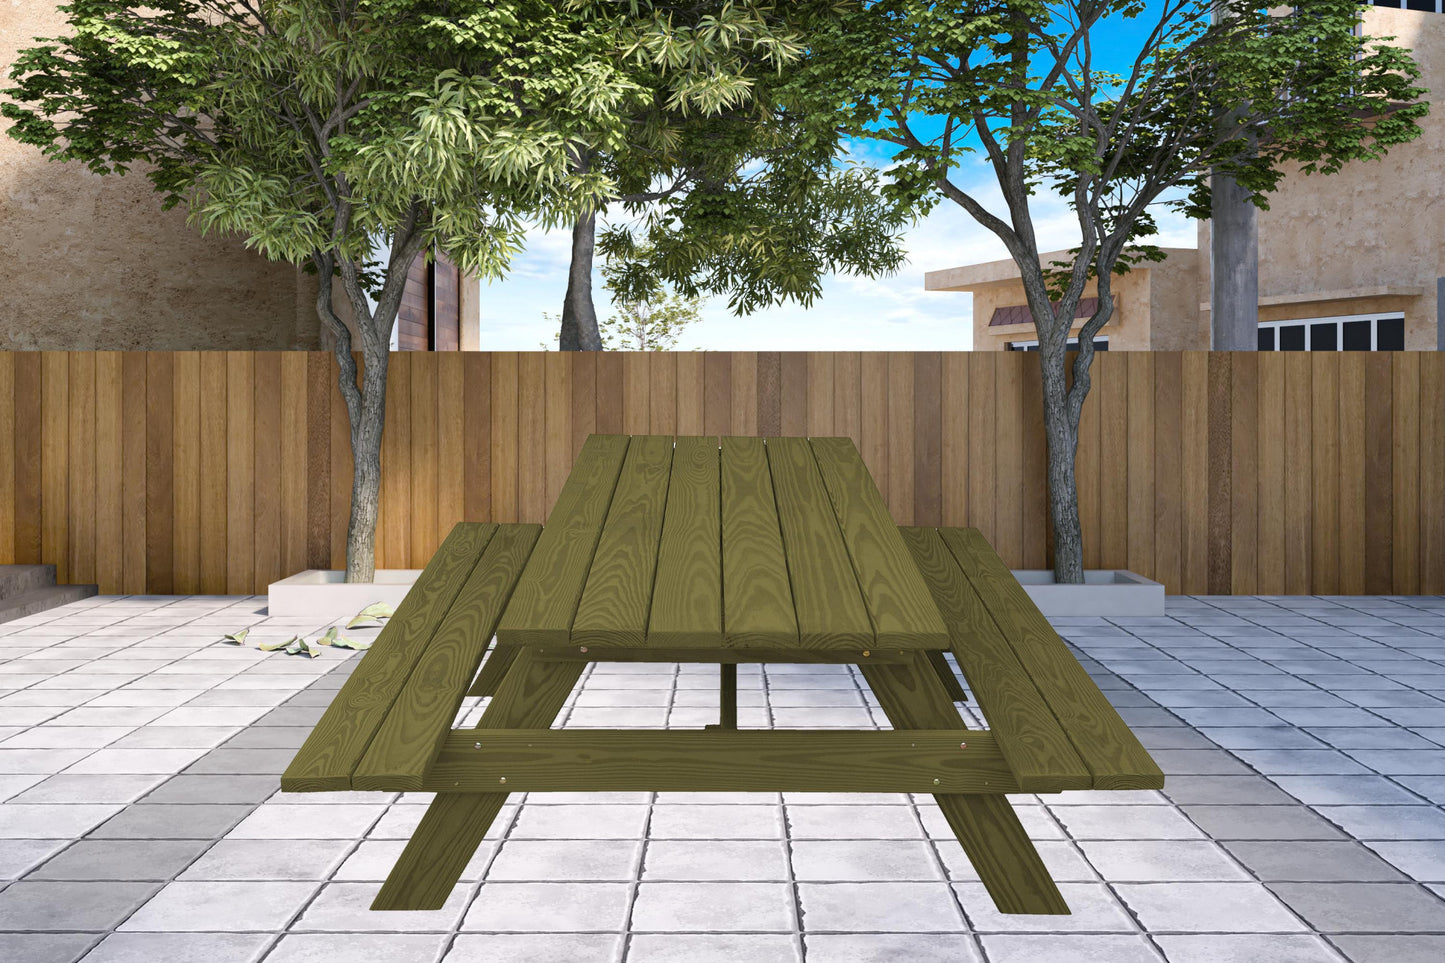 Green Solid Wood Outdoor Picnic Table